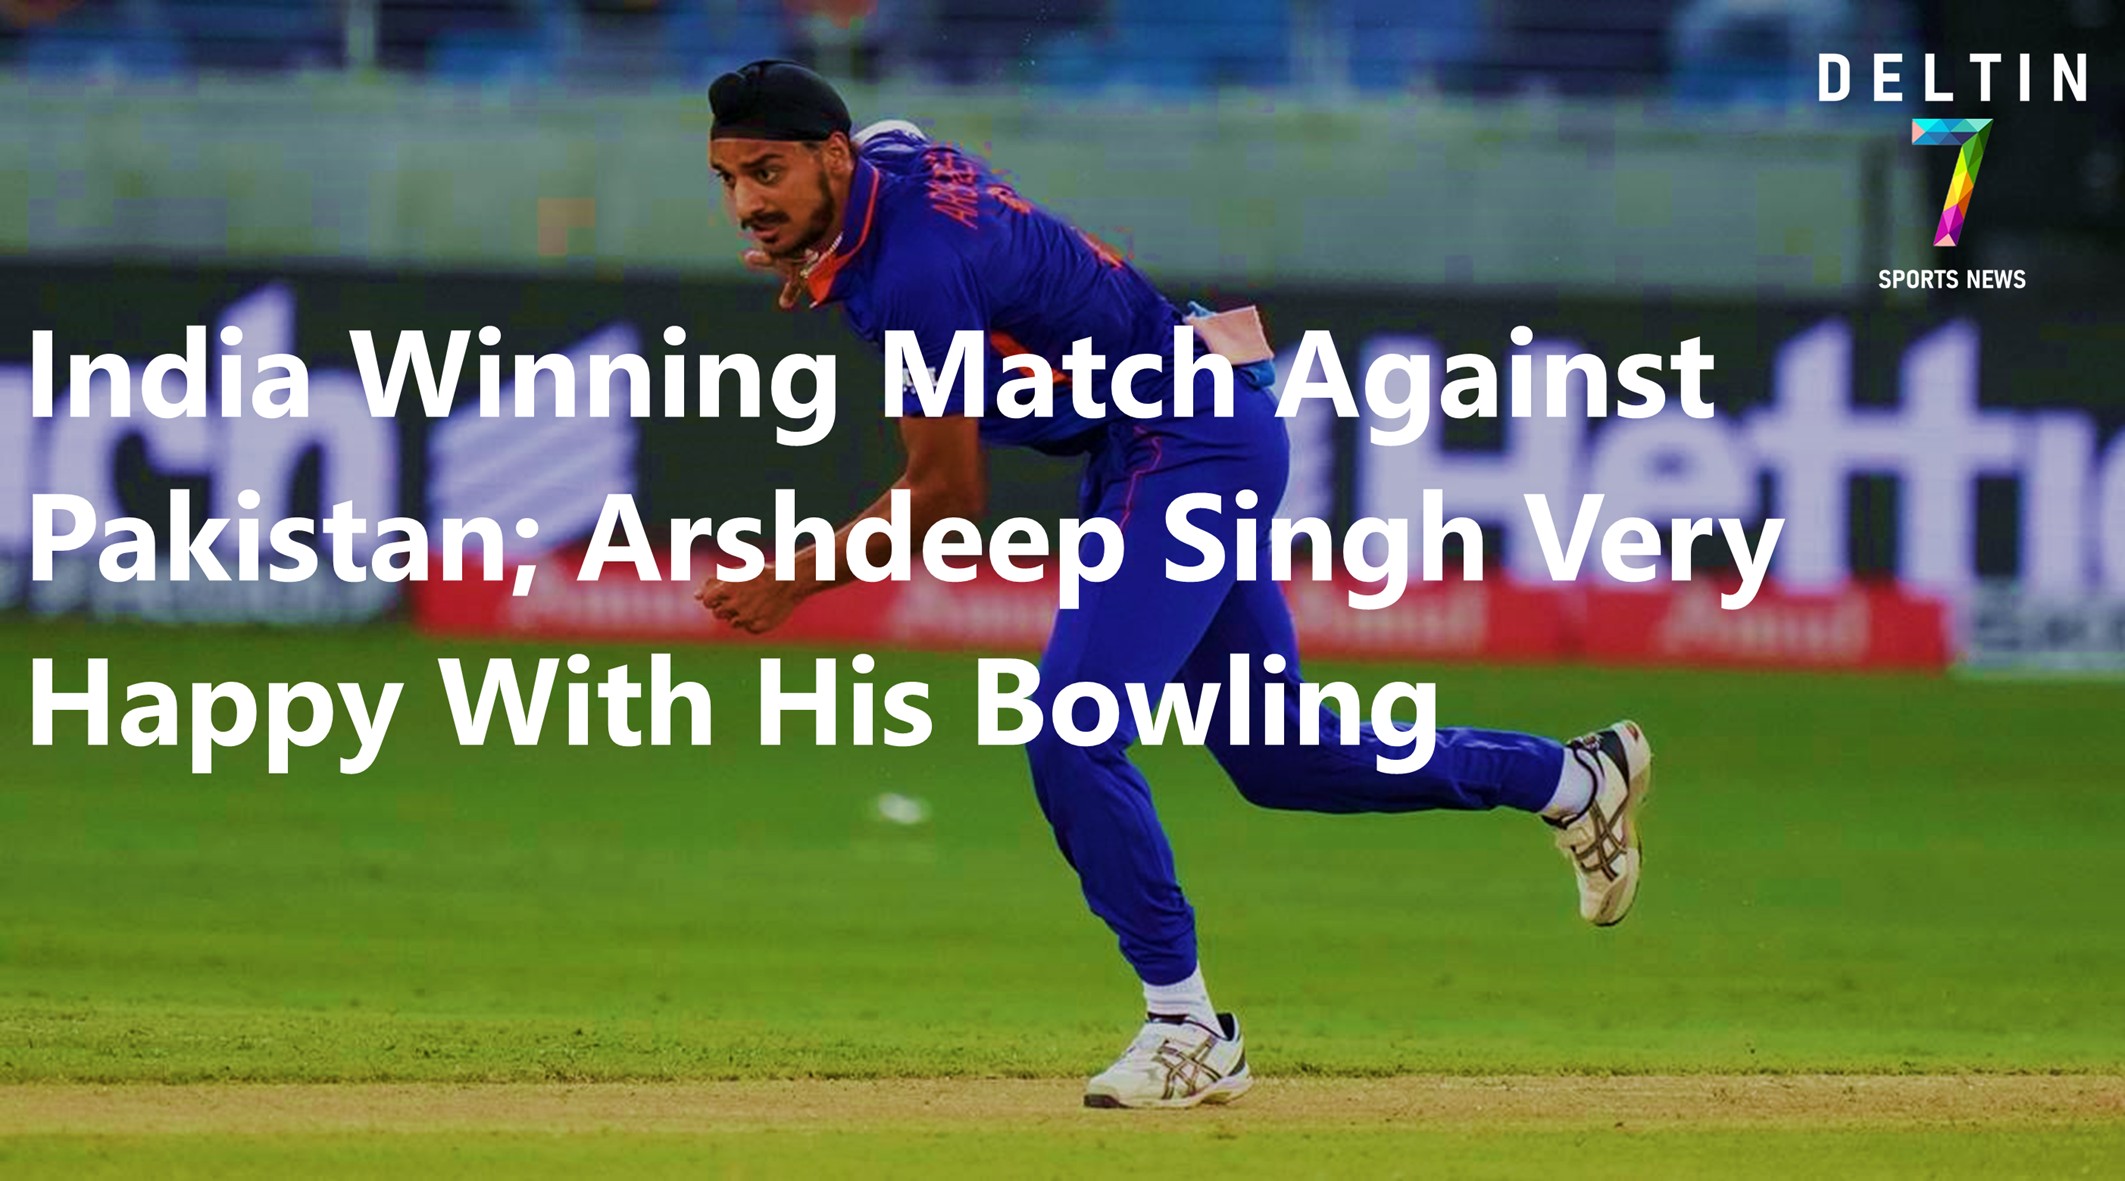 Arshdeep Singh Very Happy with His Bowling